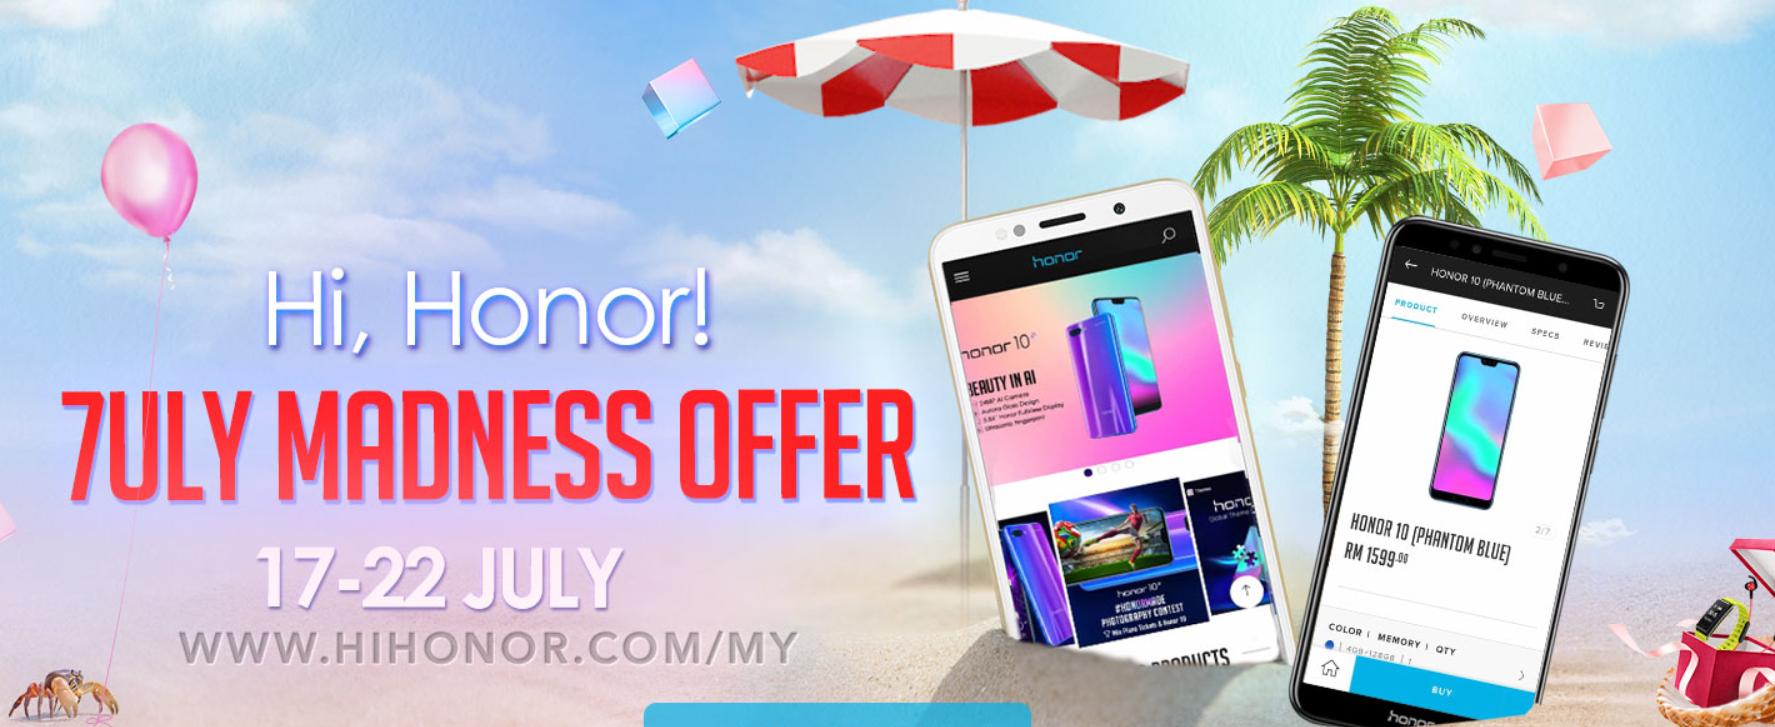 honor Malaysia to launch 7uly Madness Offers - vouchers, freebies and phone discounts starting from RM349